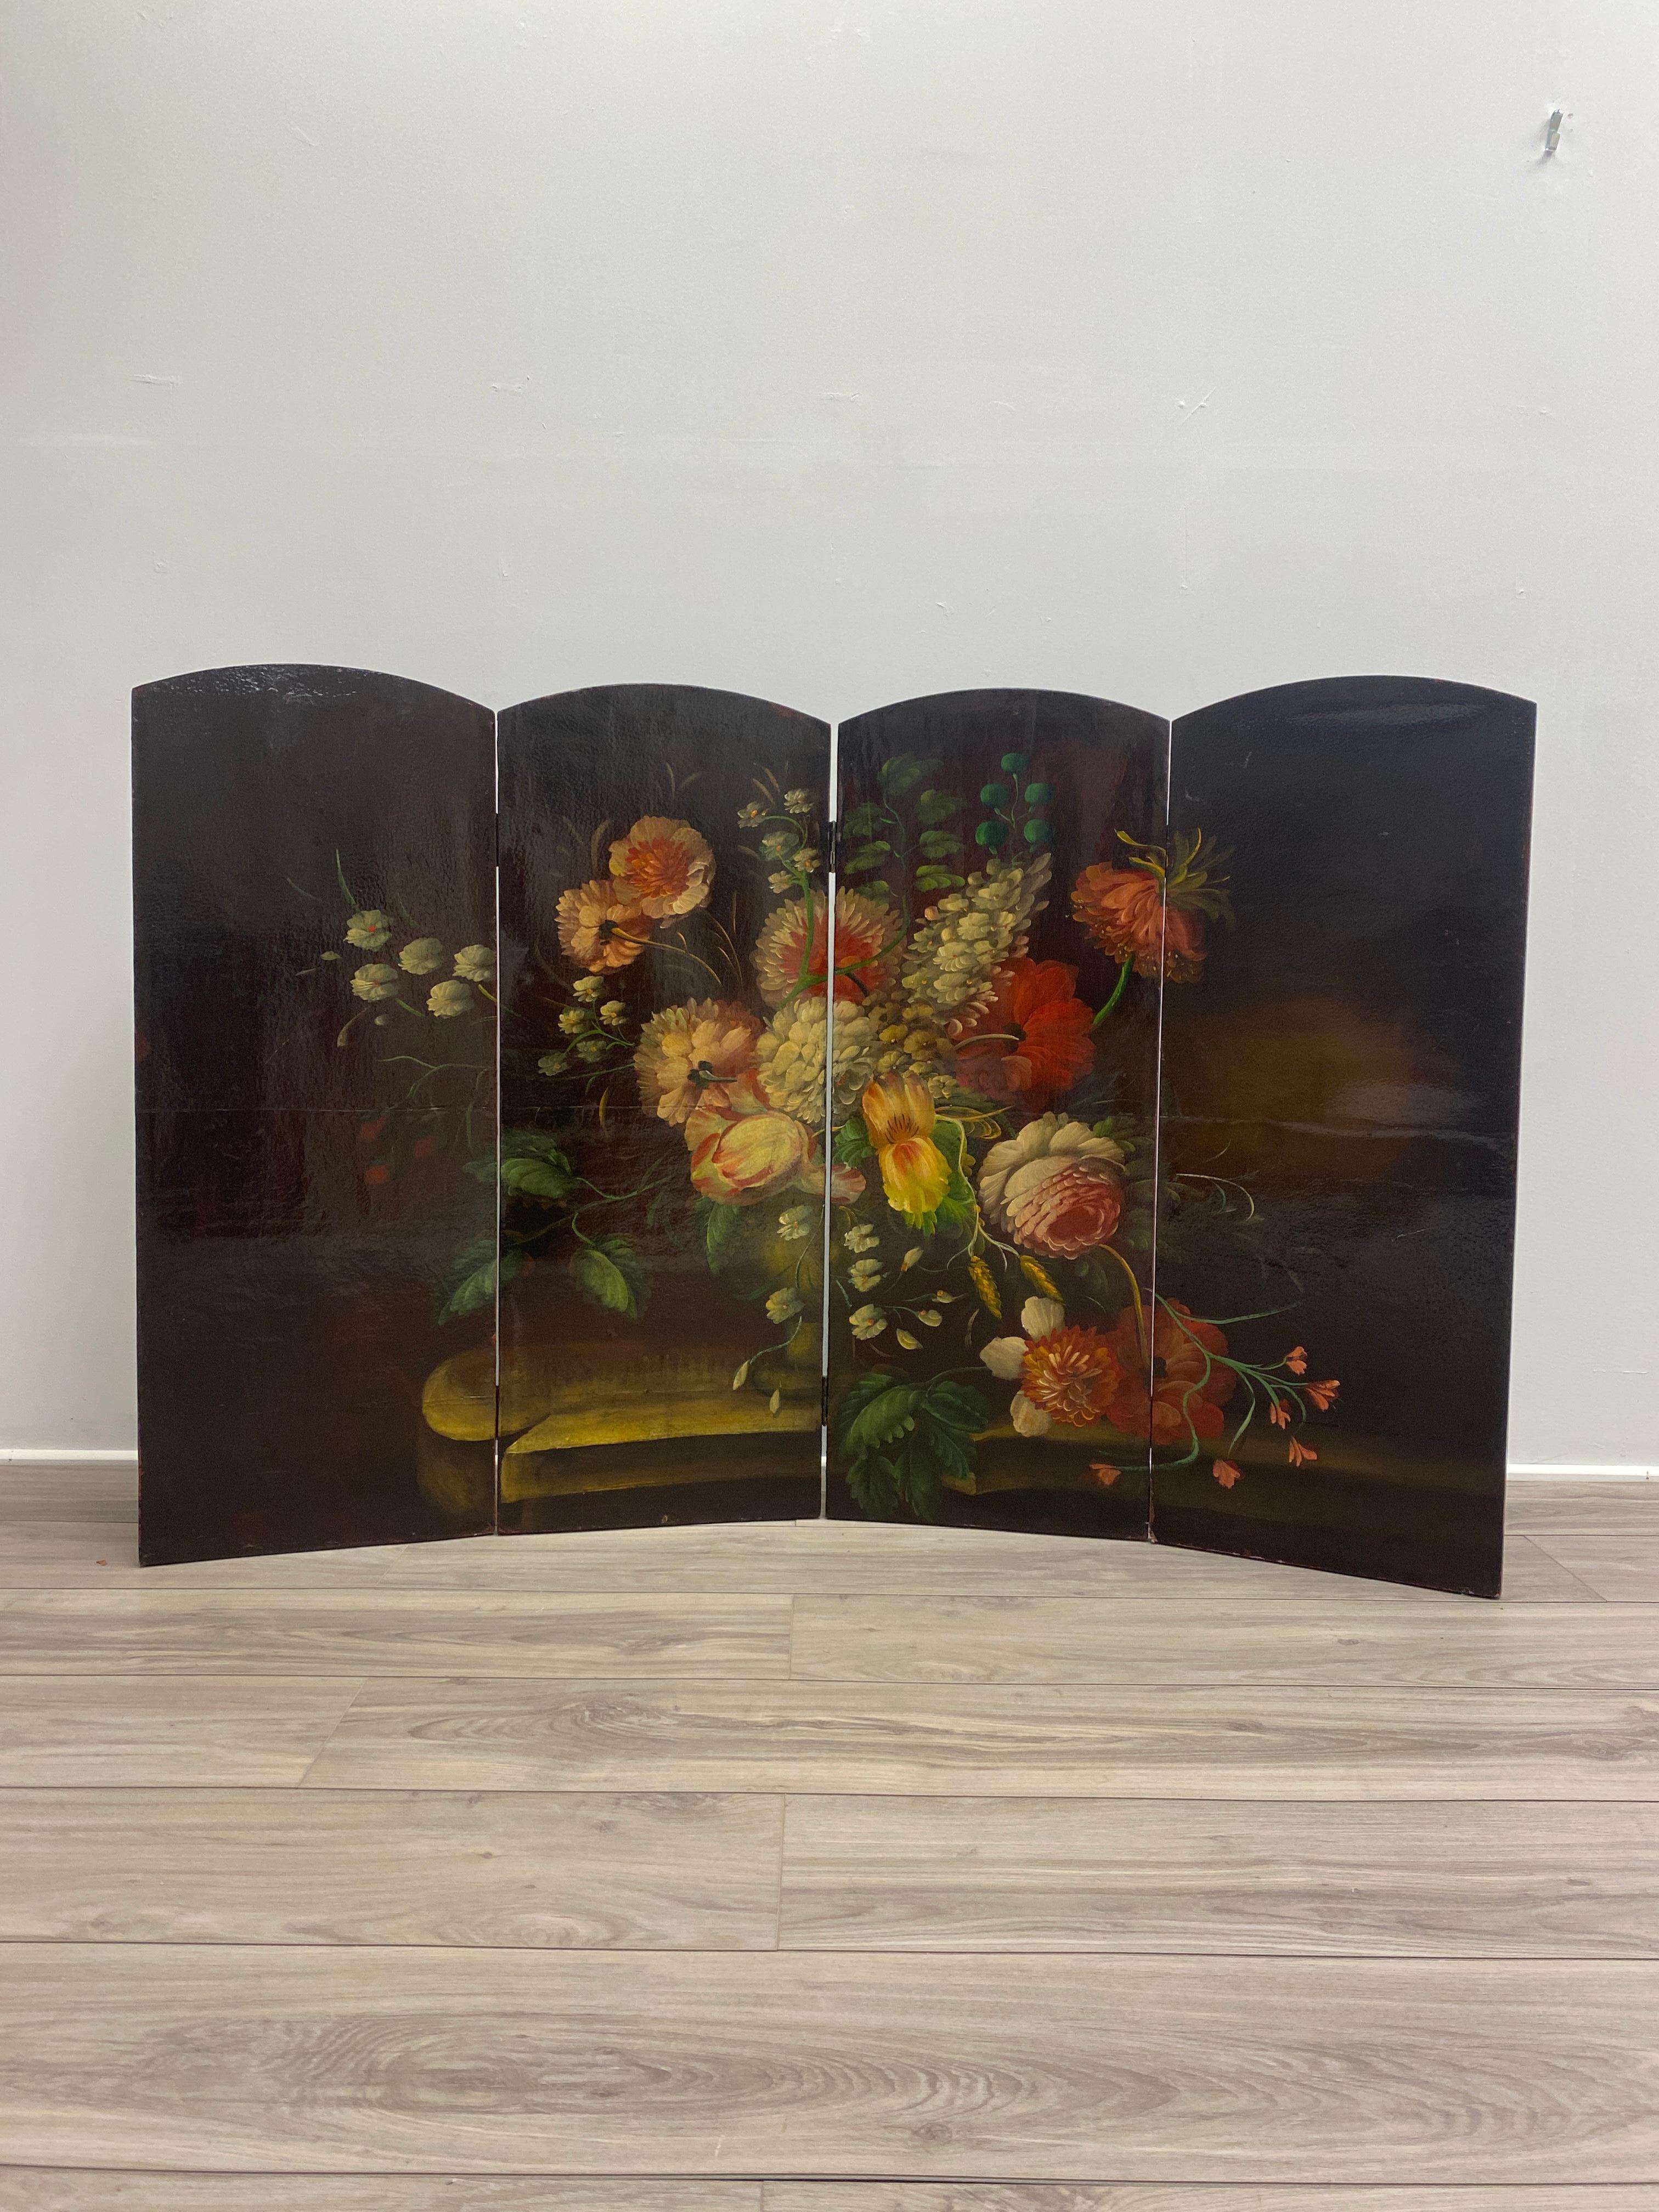 Late 19th century Italian screen with a gorgeous oil painting of floral scene. The oil paint colors are vibrant and in good condition. The frame is made of canvas over a wooden frame with four hinged panels rectangular with arched tops.